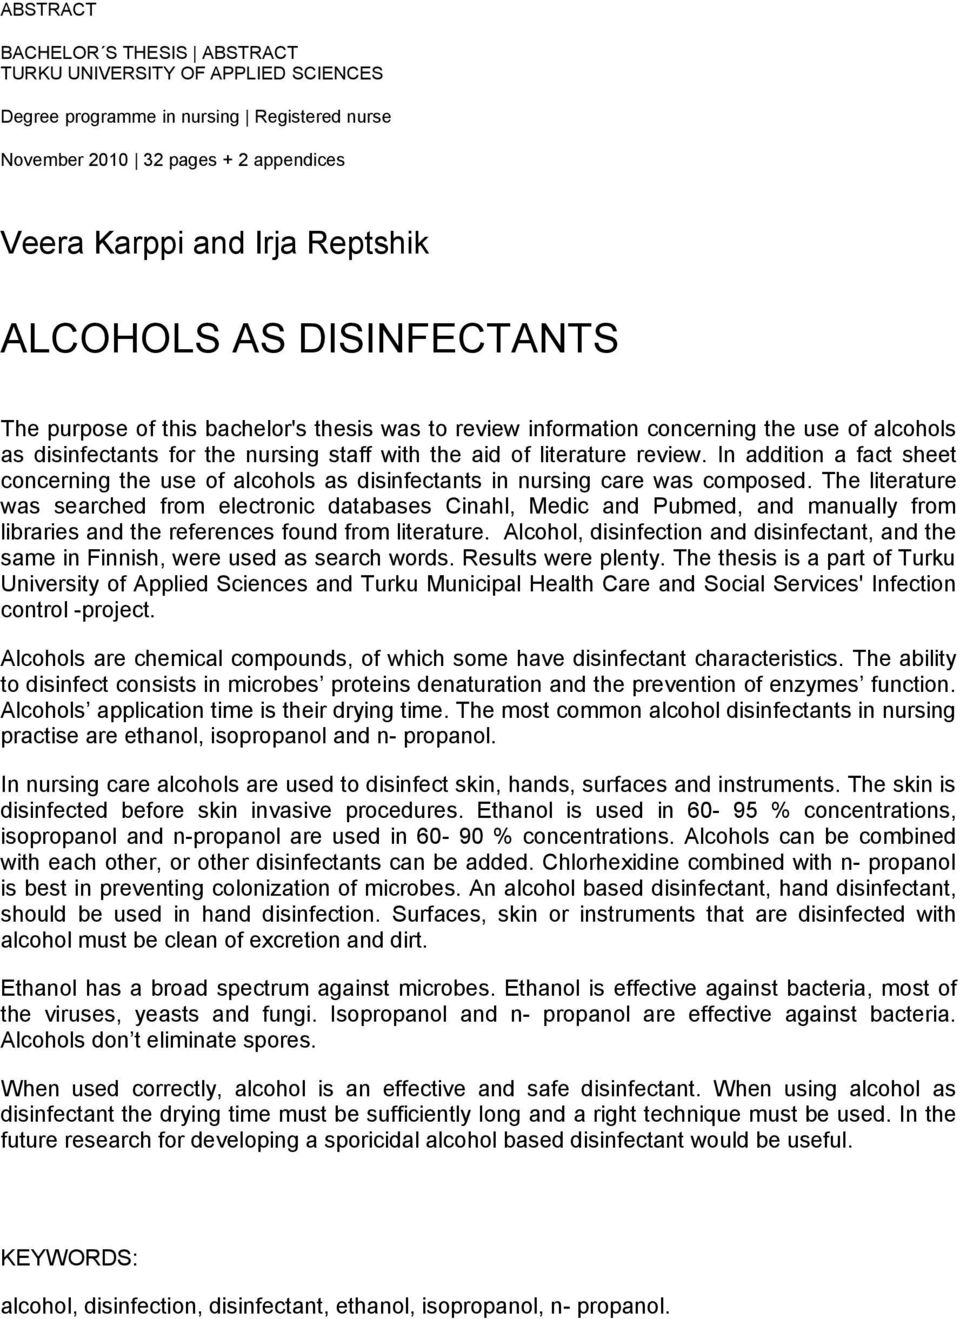 In addition a fact sheet concerning the use of alcohols as disinfectants in nursing care was composed.